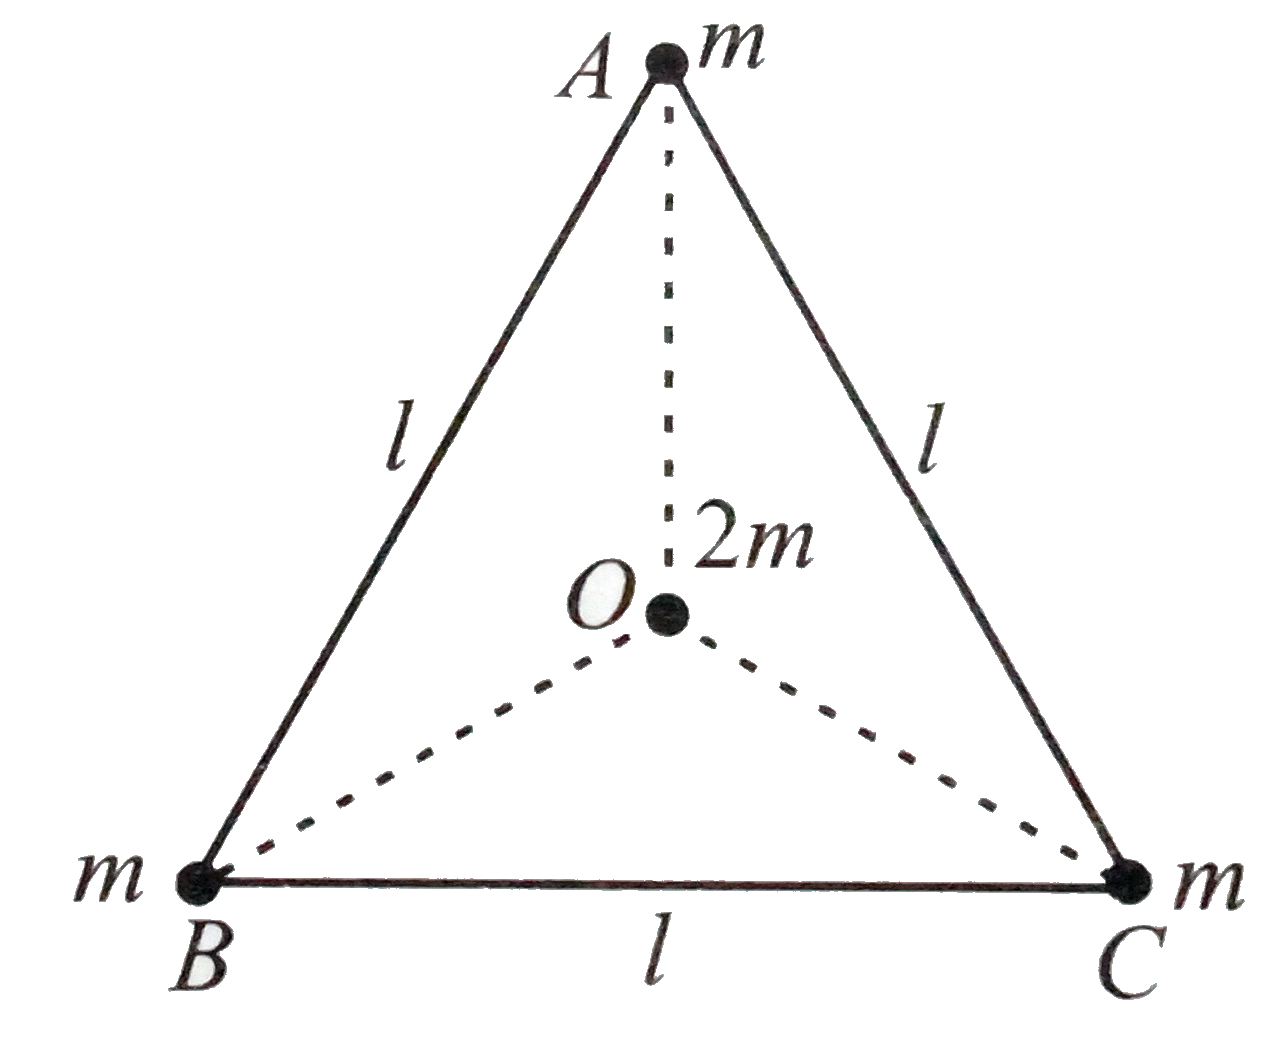 Three masses each of mass m are placed at the vertices of an equilateral triangles ABC of side l as shown in figure. The force acting on a mass 2m placed at the centroid O of the triangle  is